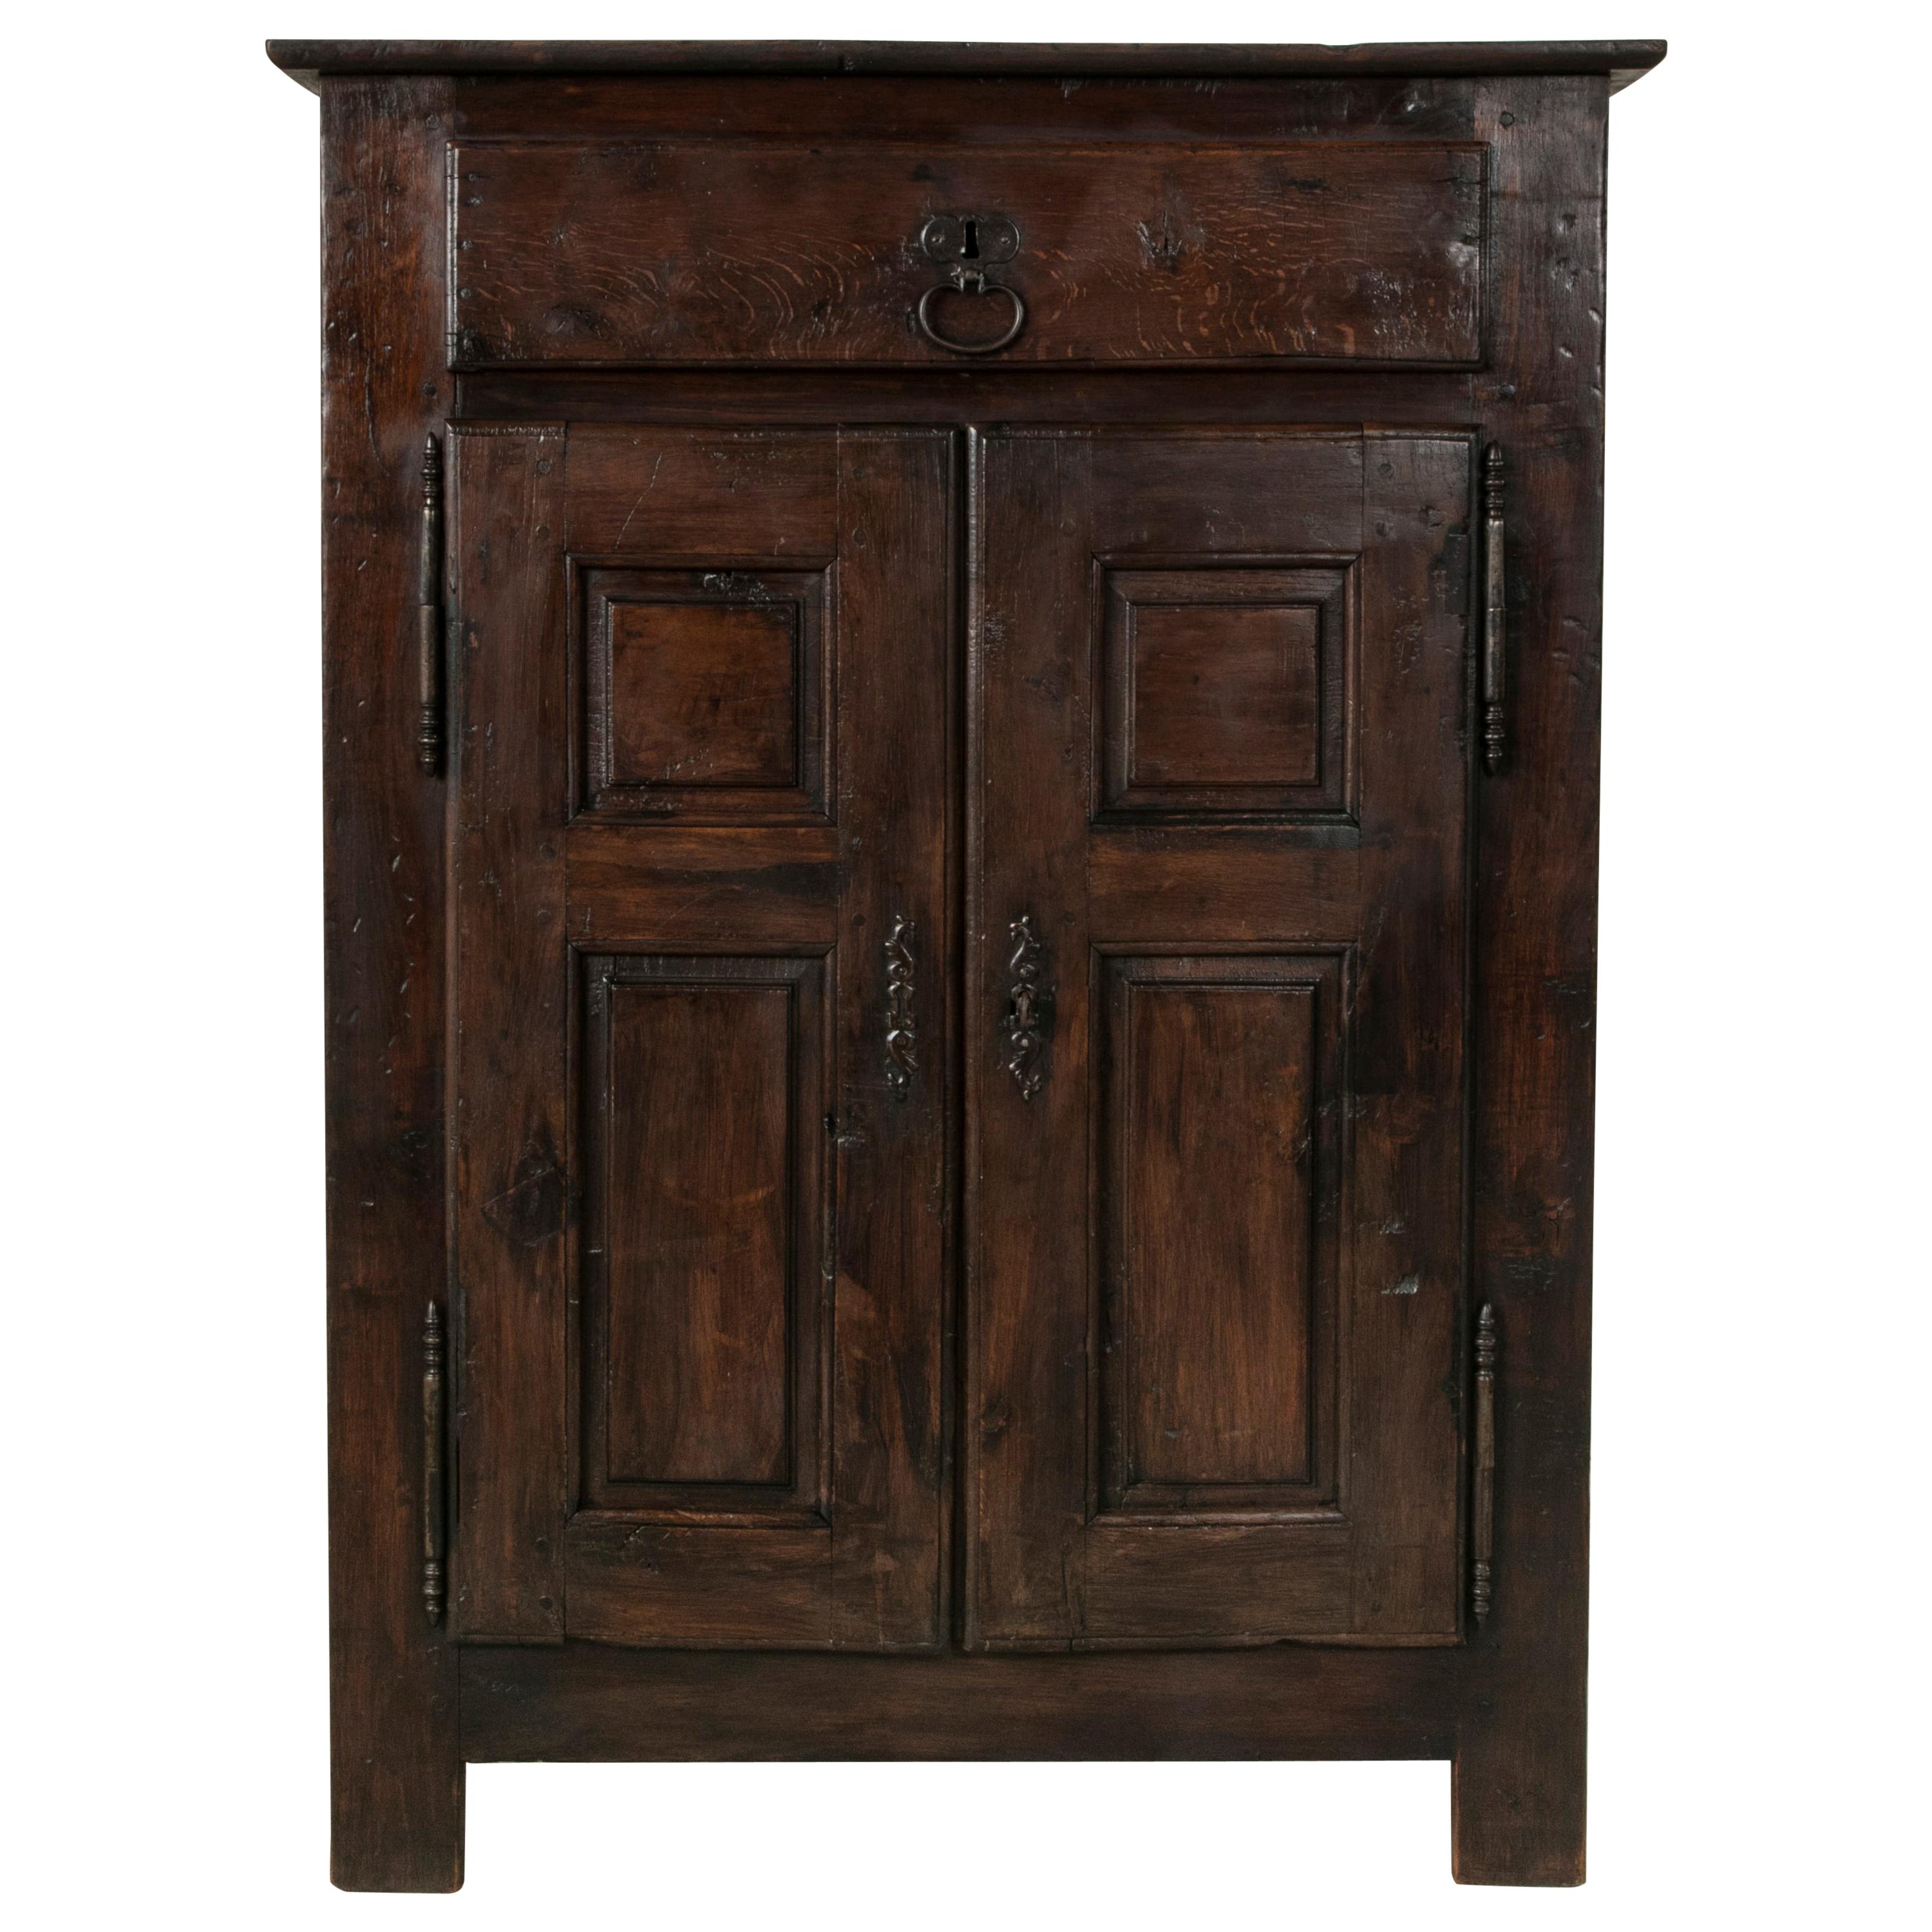 Tall early 19th Century French Louis XIV Style Oak Buffet d'Appui Cabinet